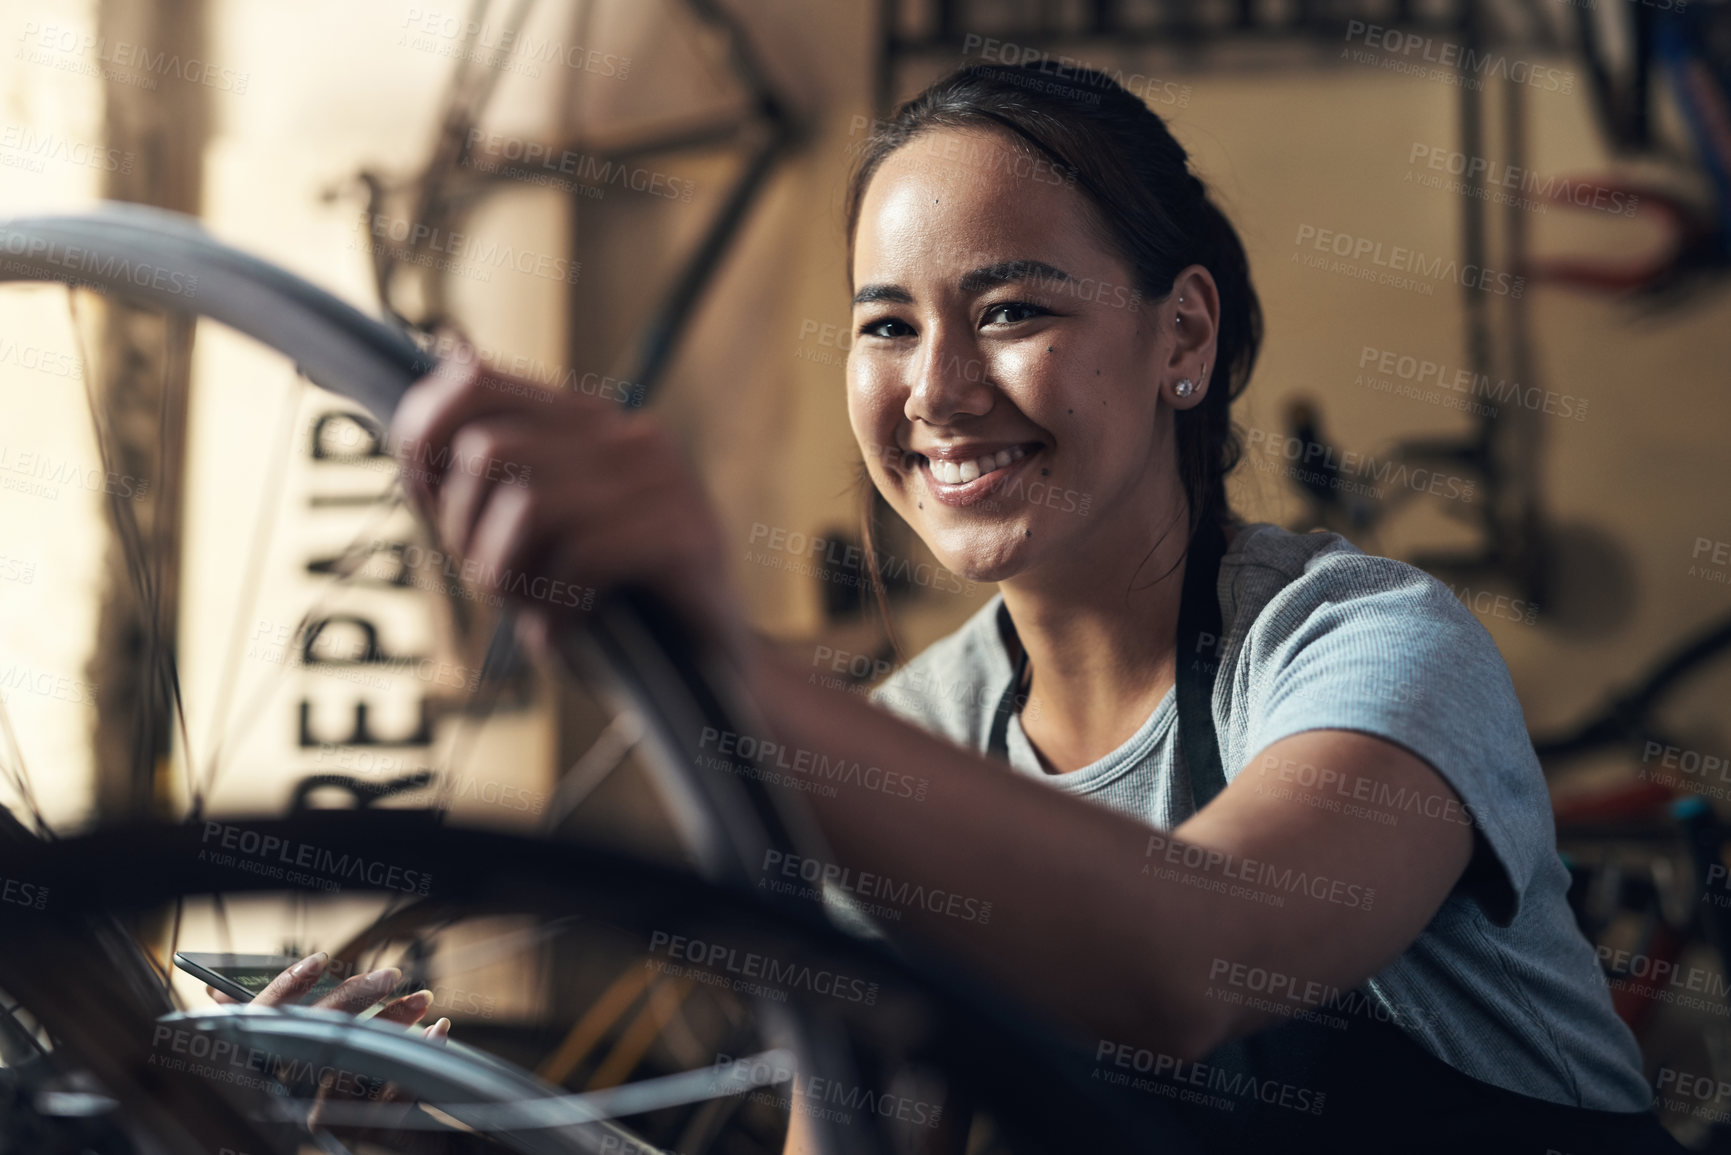 Buy stock photo Portrait of a young woman looking extremely pleased while holding a cellphone and fixing a bike at a bicycle repair shop